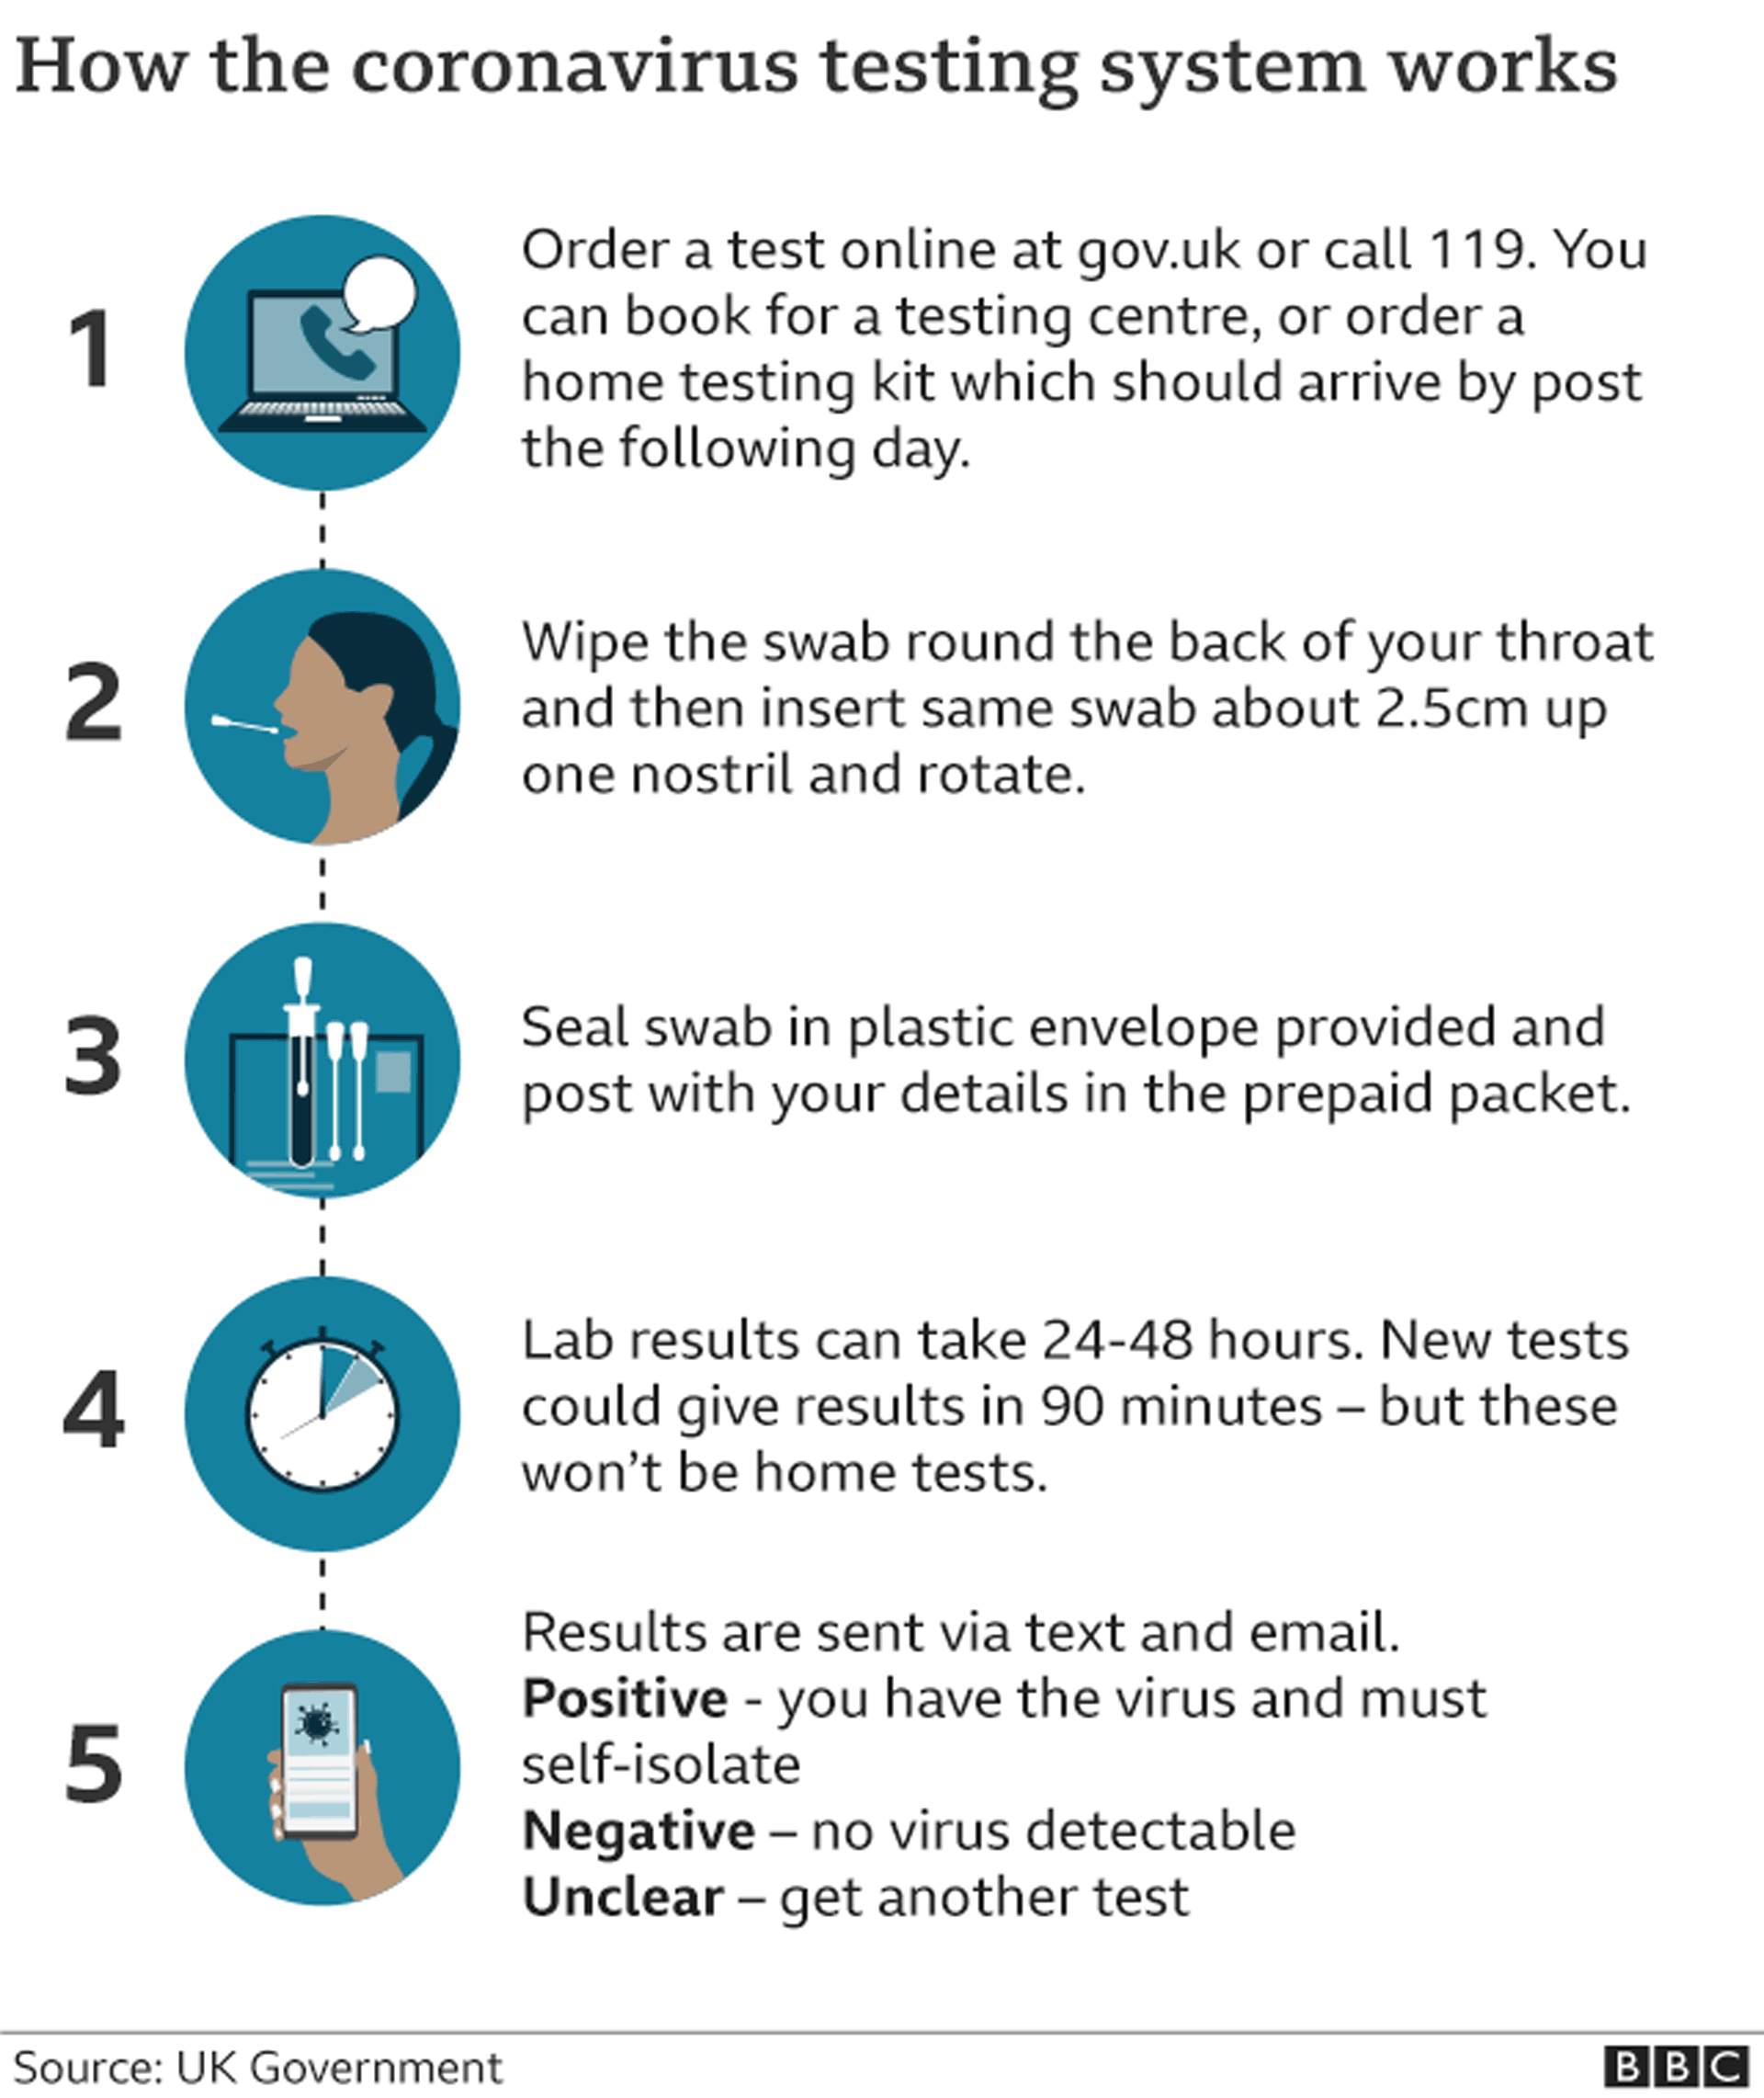 how the coronavirus testing system works: order a test either to your home or go to a testing centre, take a swab of the back of your throat and up your nose, if it's a home test seal it up and send it back, postage paid. lab results can take between 24 and 48 hours. results are sent via text and email